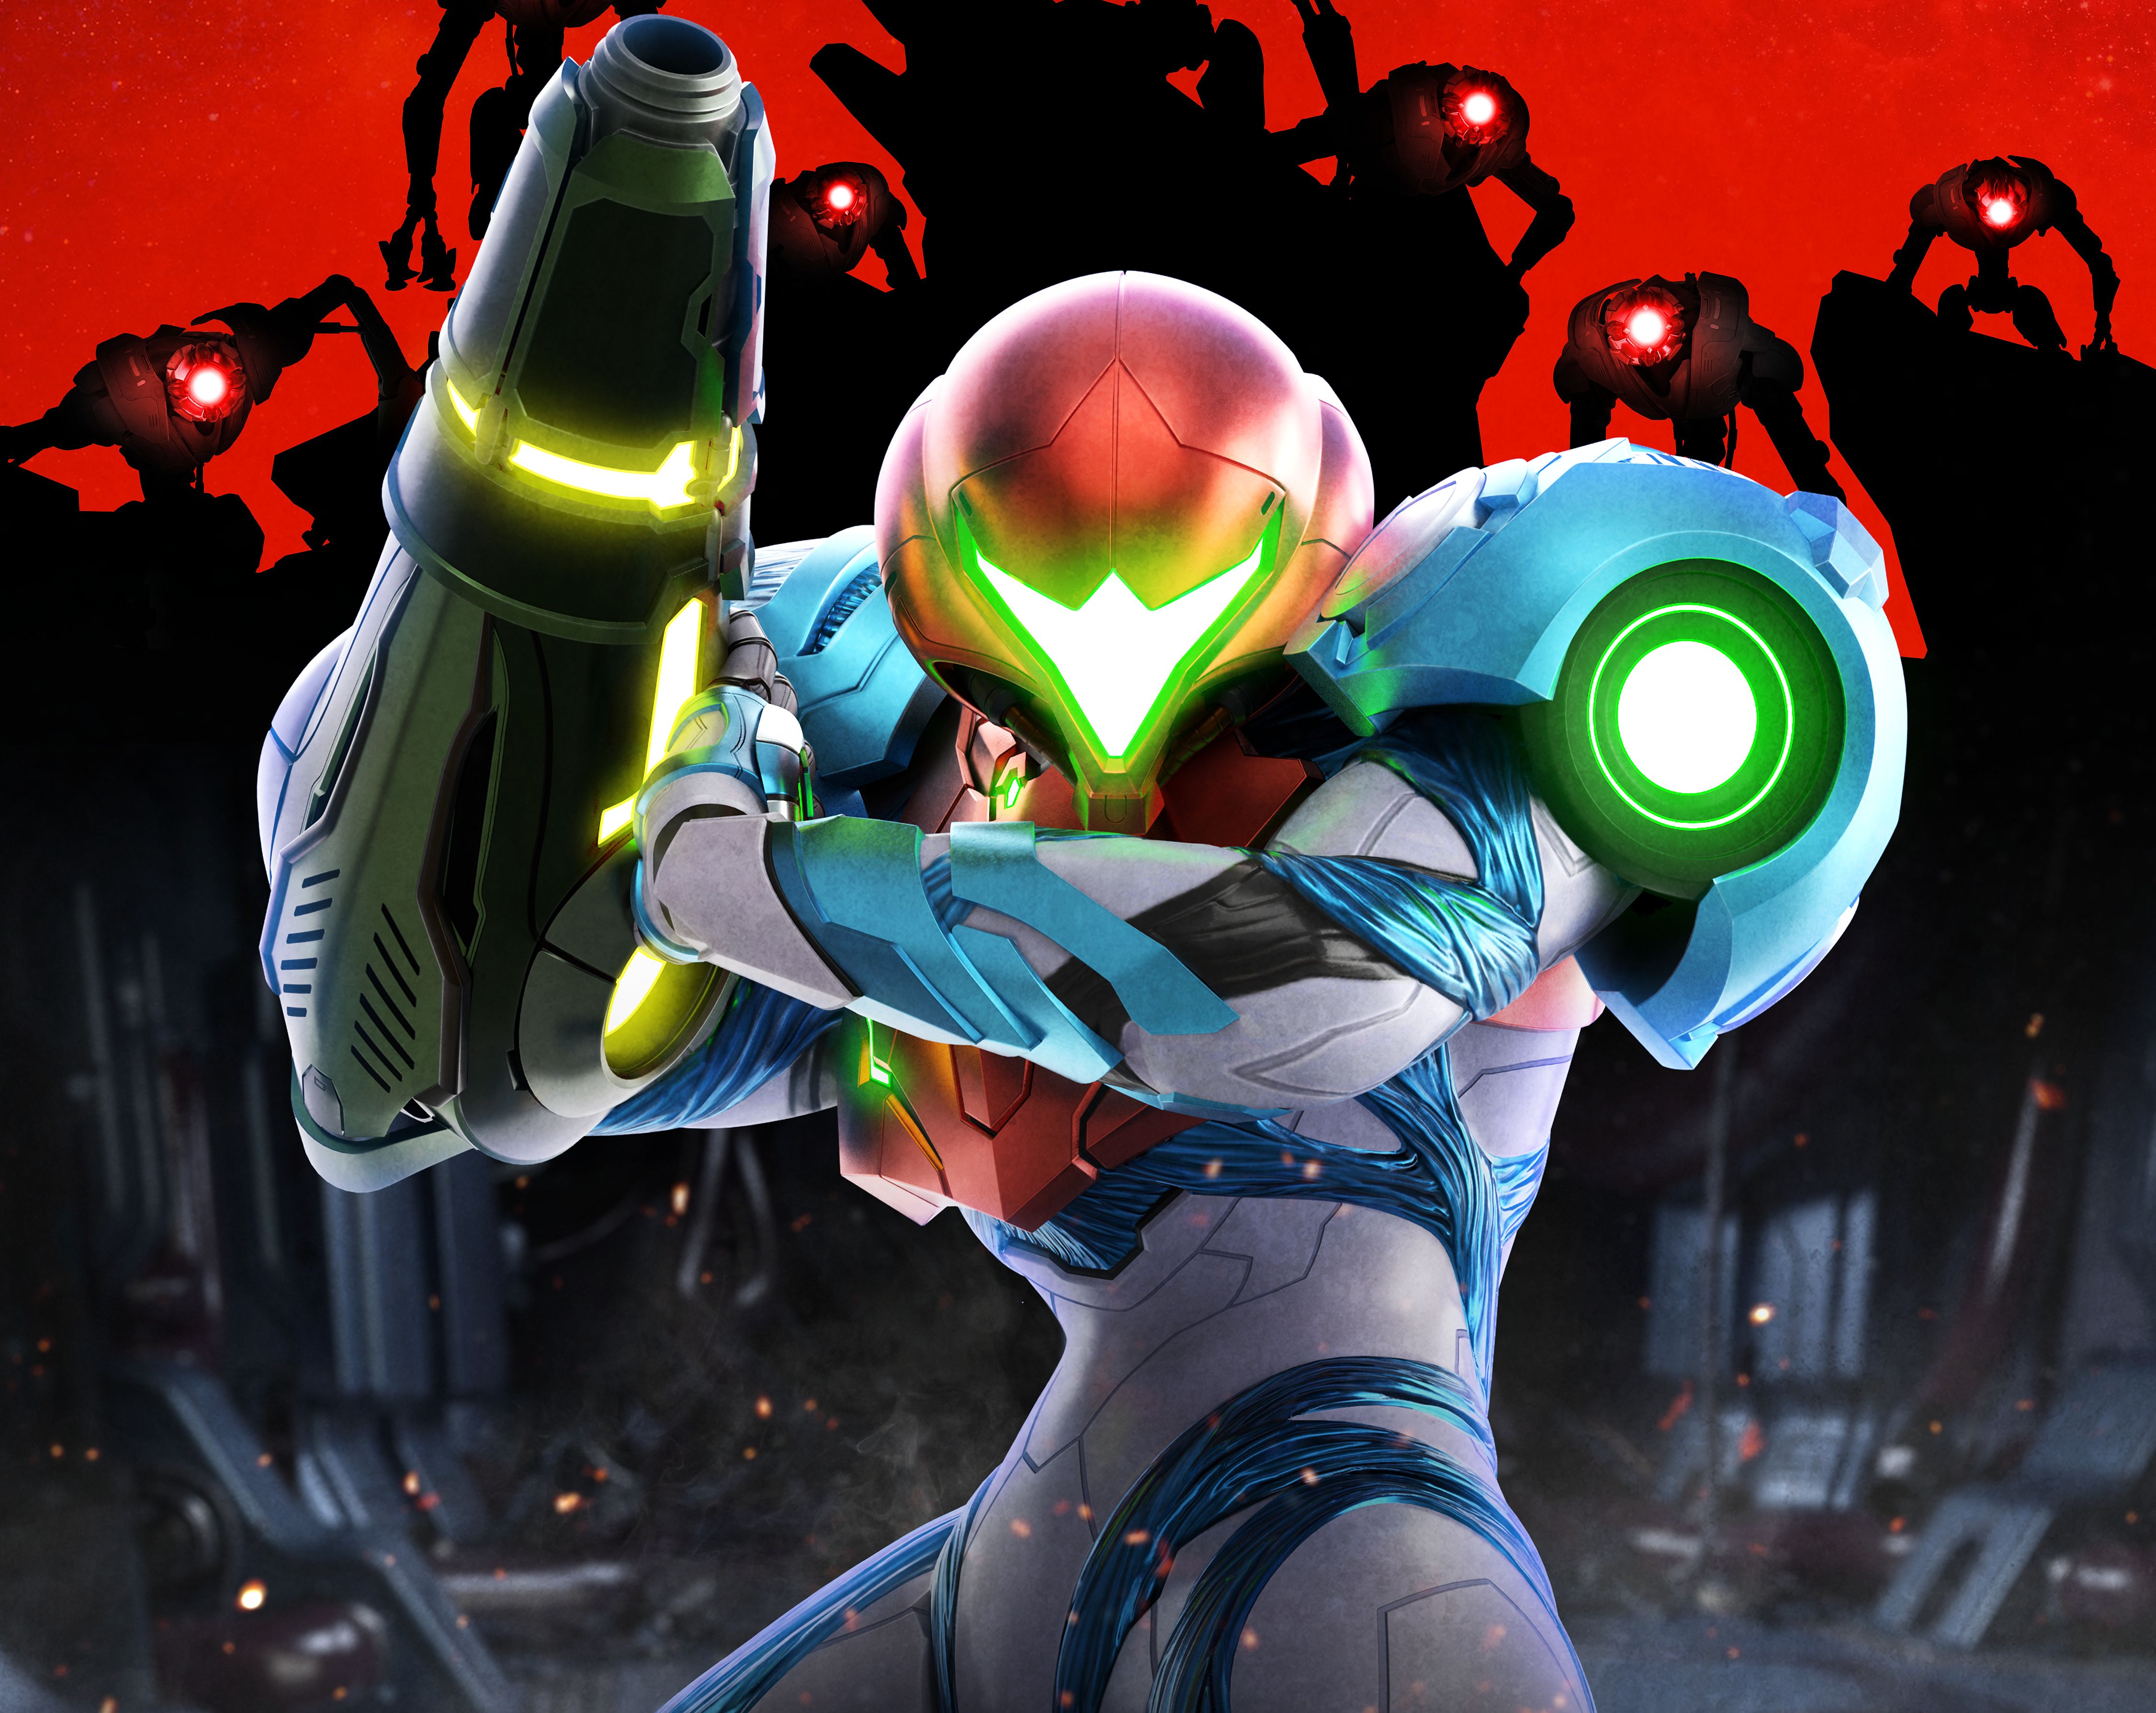 Image for Metroid Dread trailer tells you everything you need to know about the game